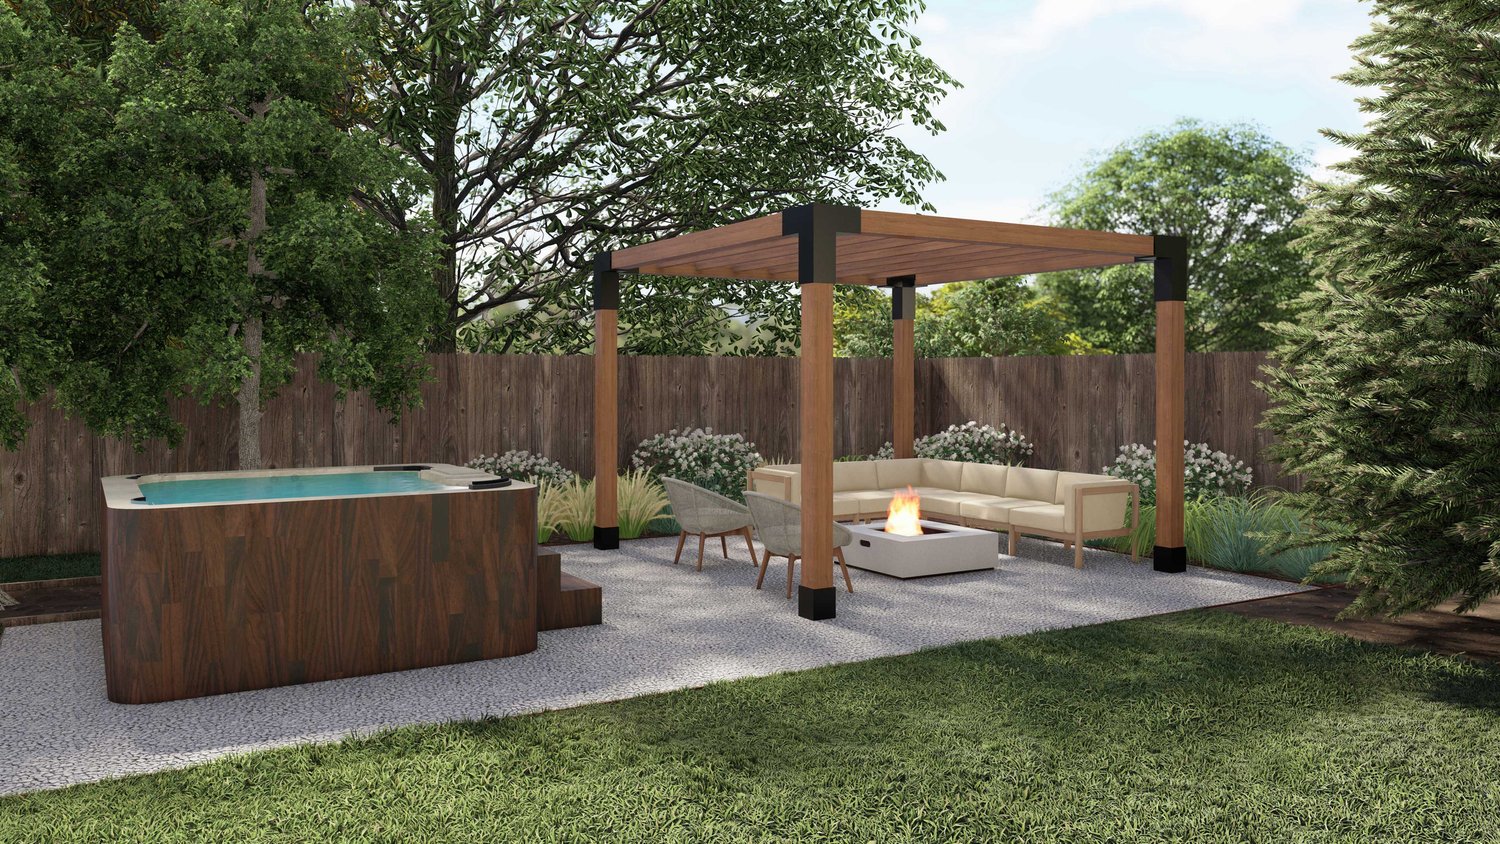 Aurora patio with pergola, fire pit and hot tub